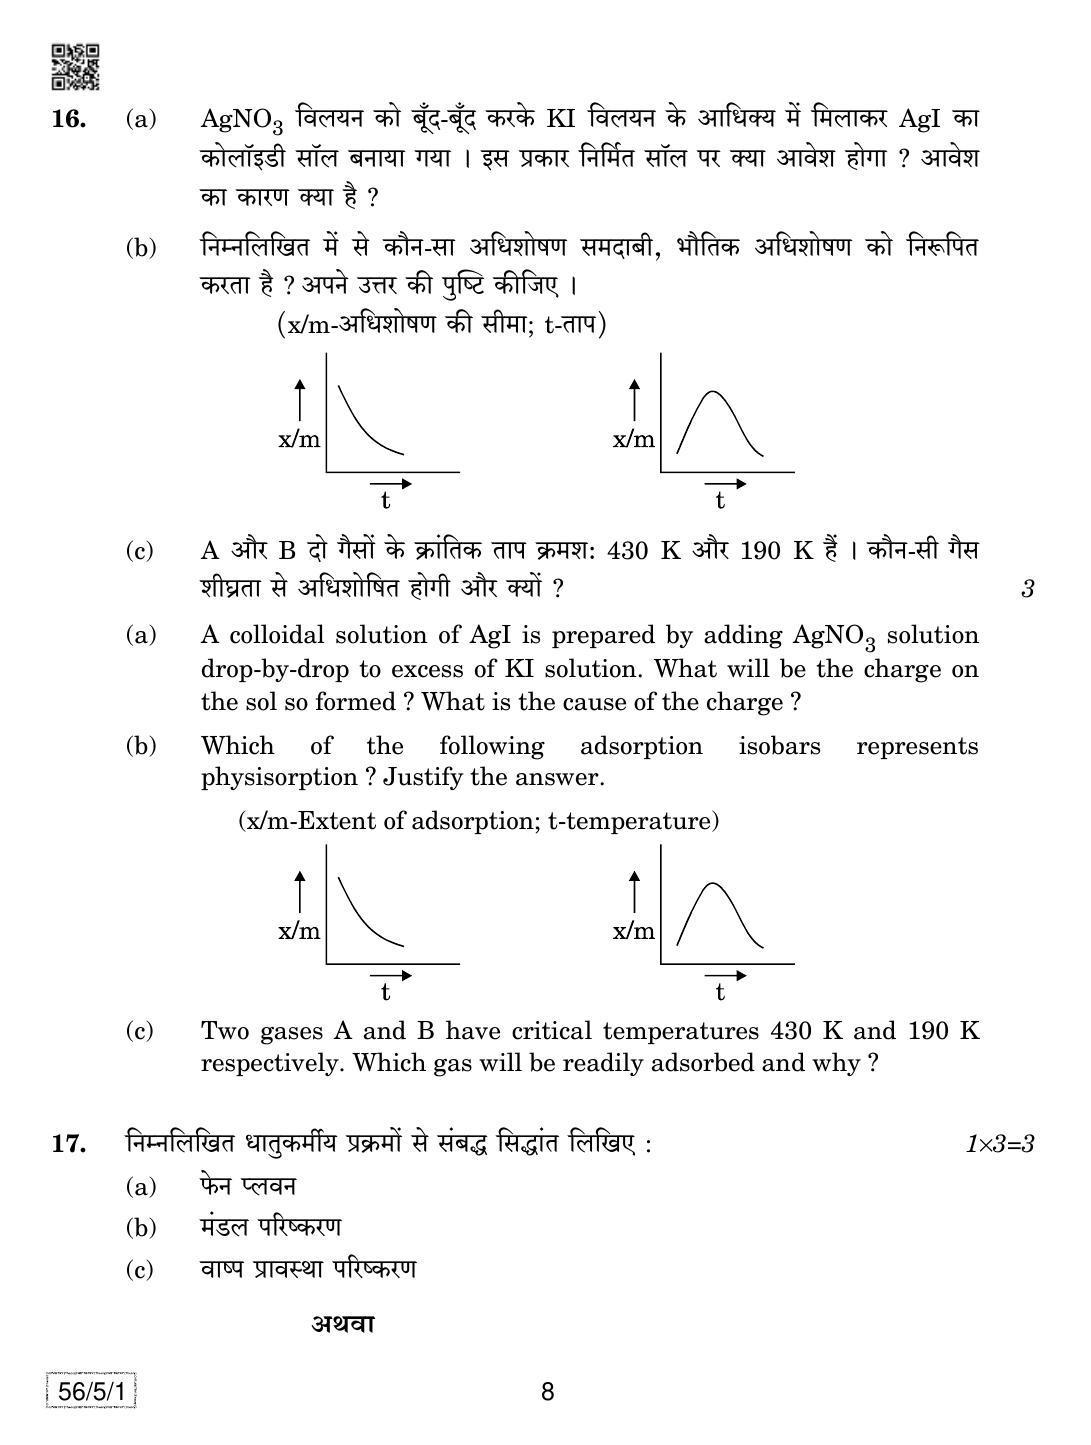 CBSE Class 12 56-5-1 Chemistry 2019 Question Paper - Page 8